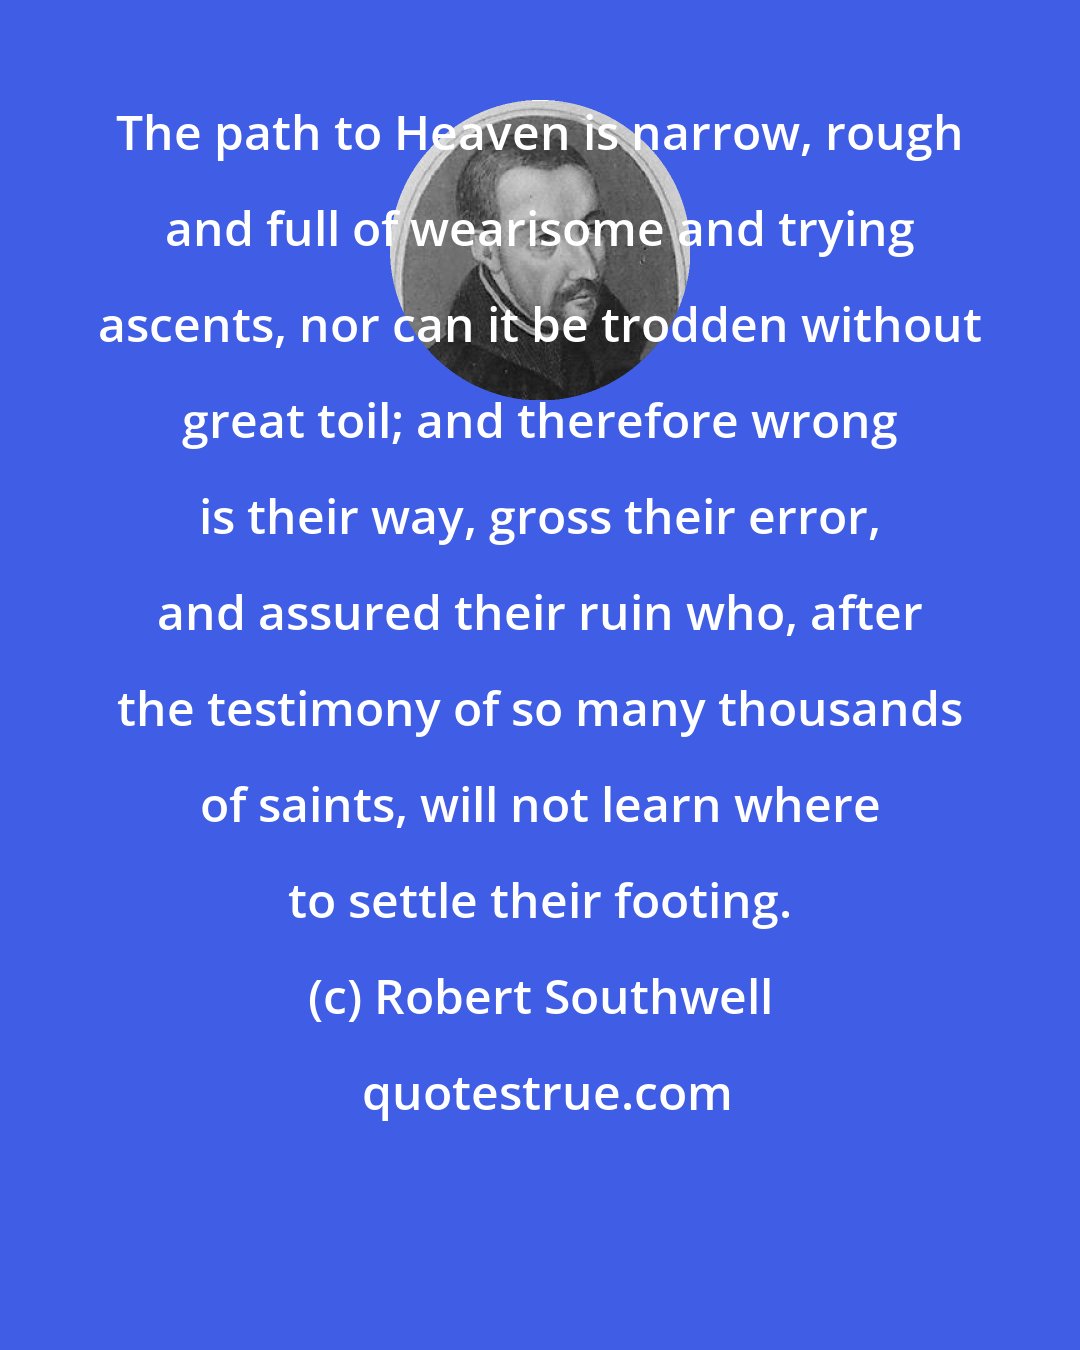 Robert Southwell: The path to Heaven is narrow, rough and full of wearisome and trying ascents, nor can it be trodden without great toil; and therefore wrong is their way, gross their error, and assured their ruin who, after the testimony of so many thousands of saints, will not learn where to settle their footing.